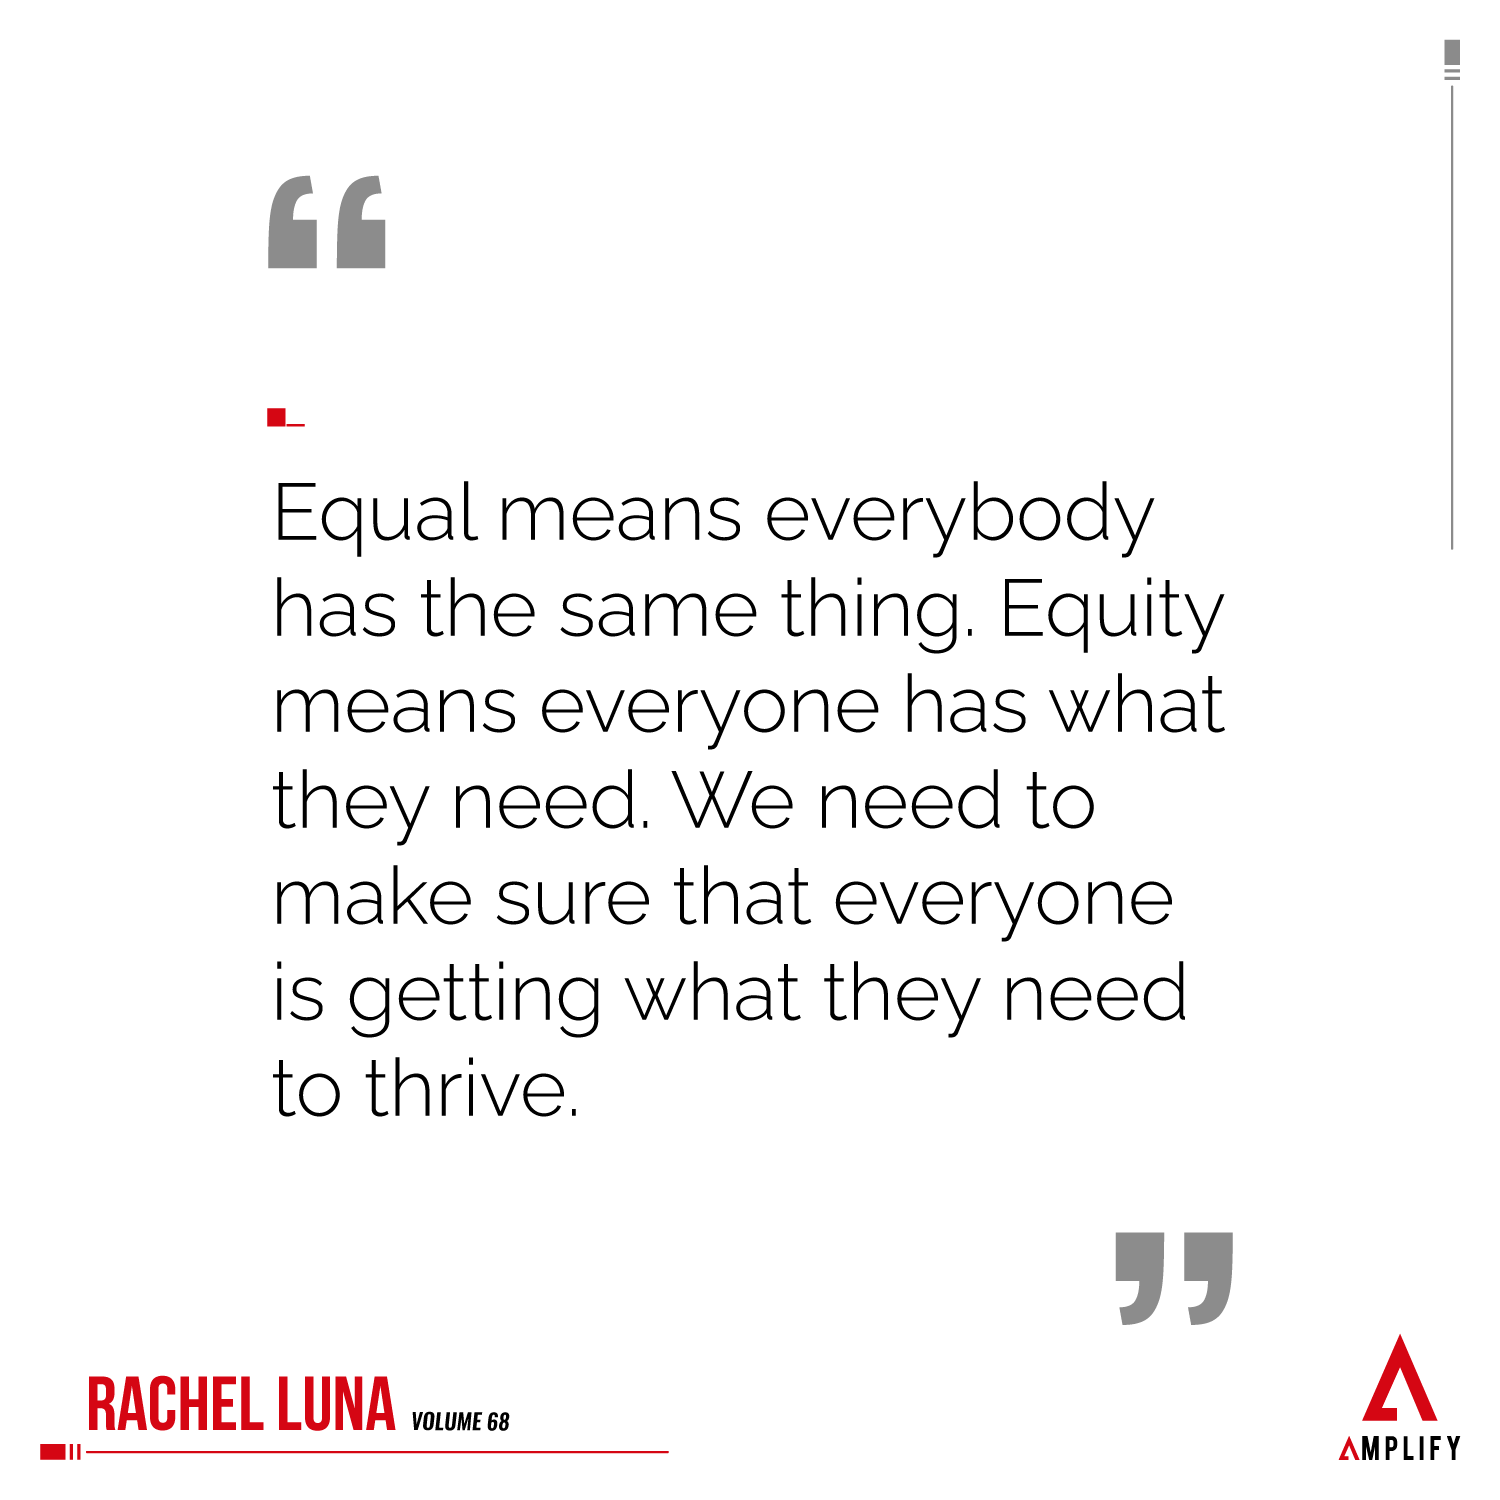 decorative image containing the quote: Equal means everybody has the same thing. Equity means everyone has what they need. We need to make sure that everyone is getting what they need to thrive.